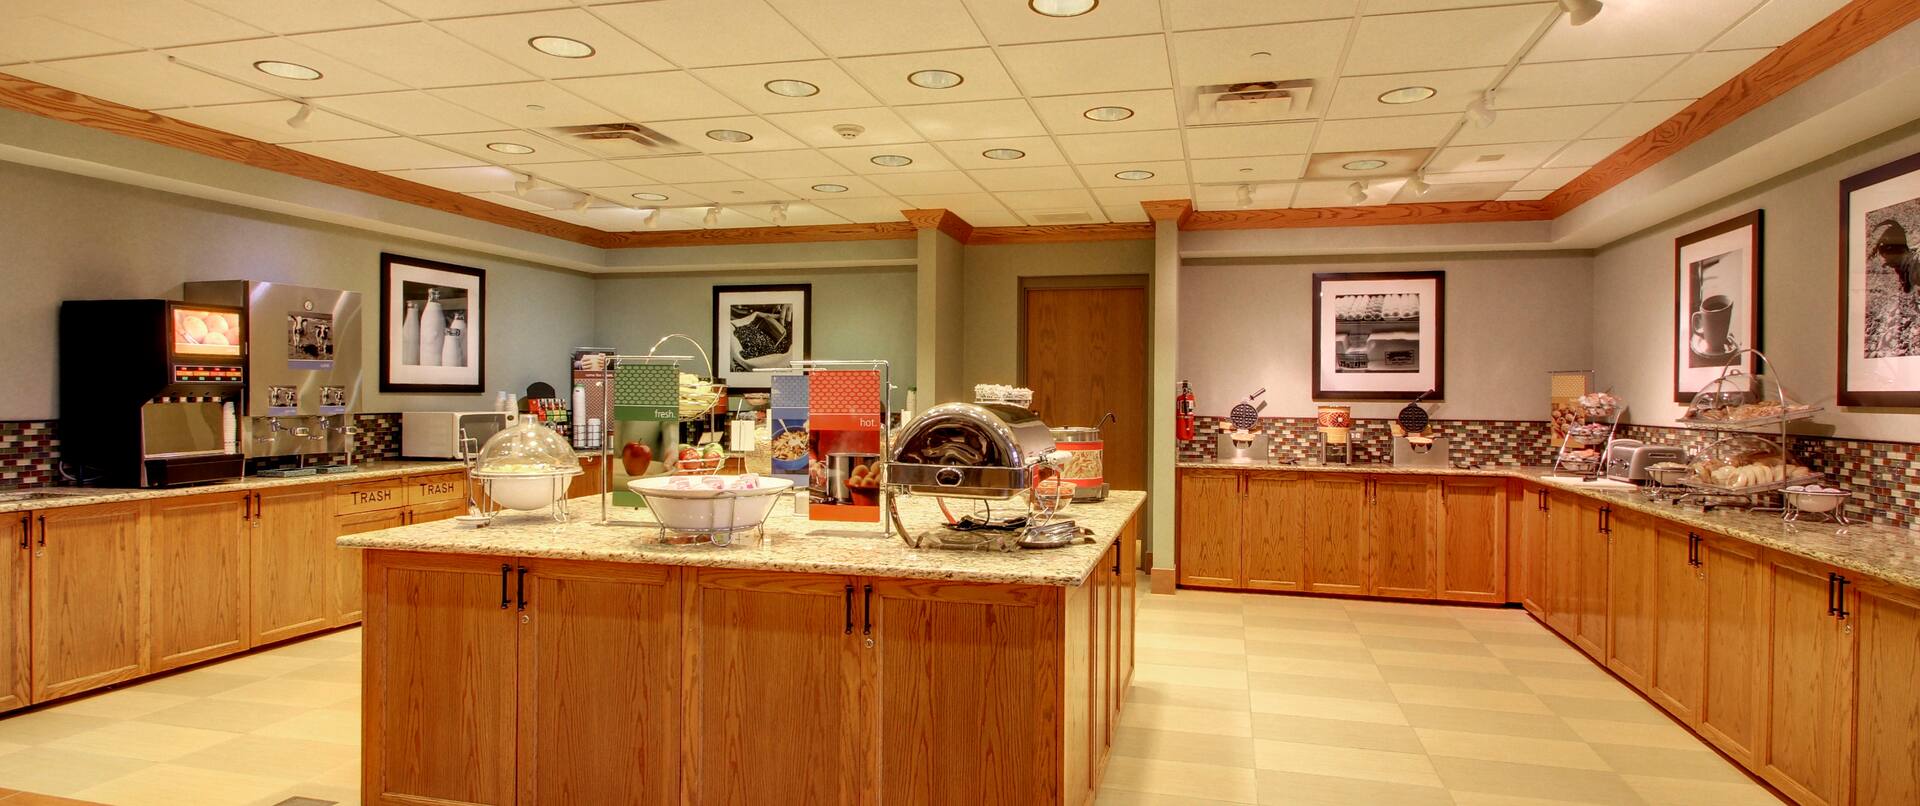 Food on Counters in Breakfast Area